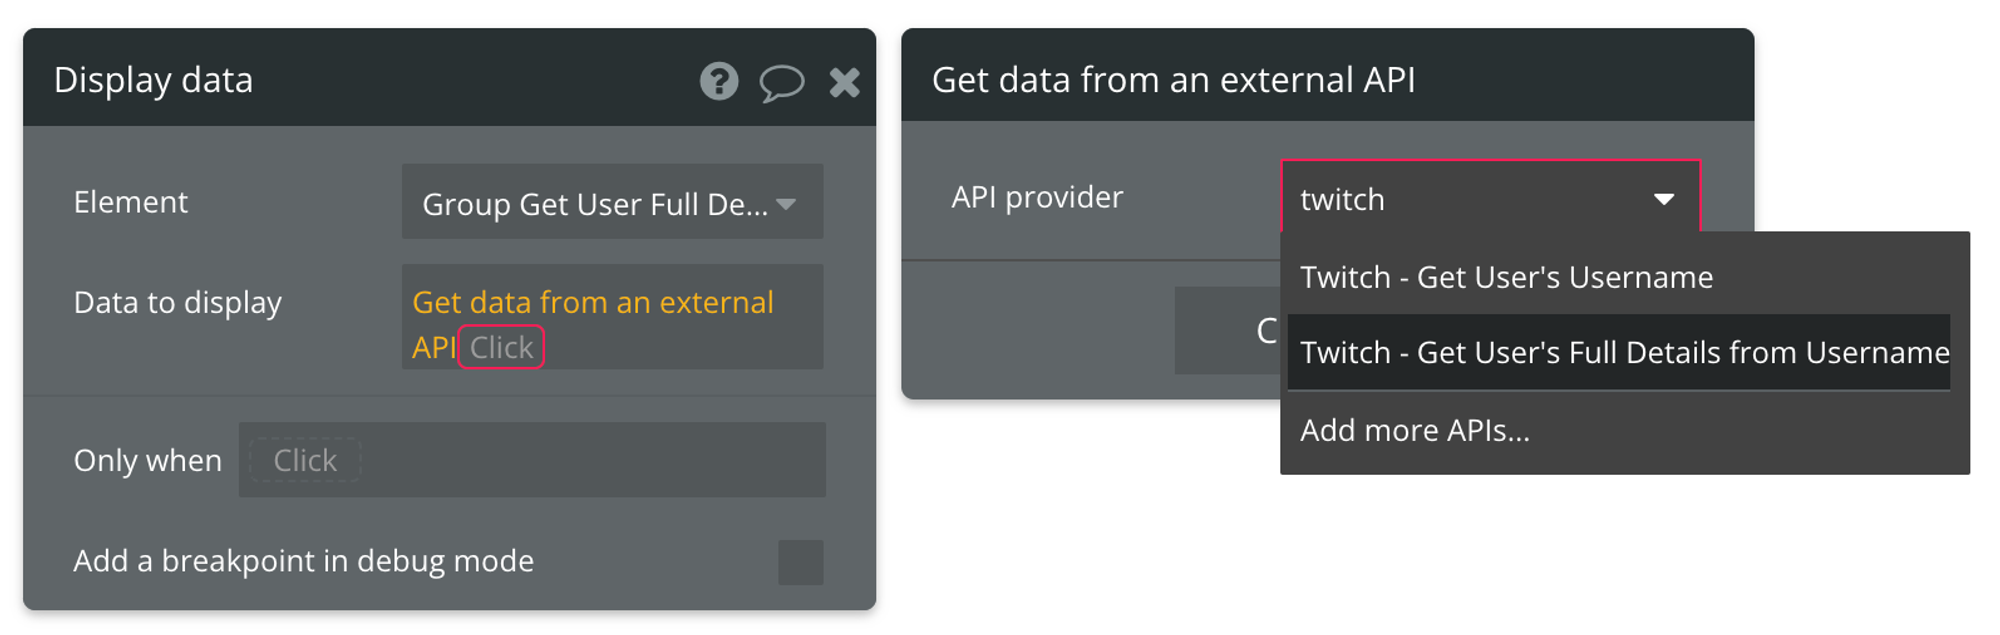 Select "Get data from external API" from the list of data sources, then find Twitch - Get User's Full Details from Username from the list of API providers